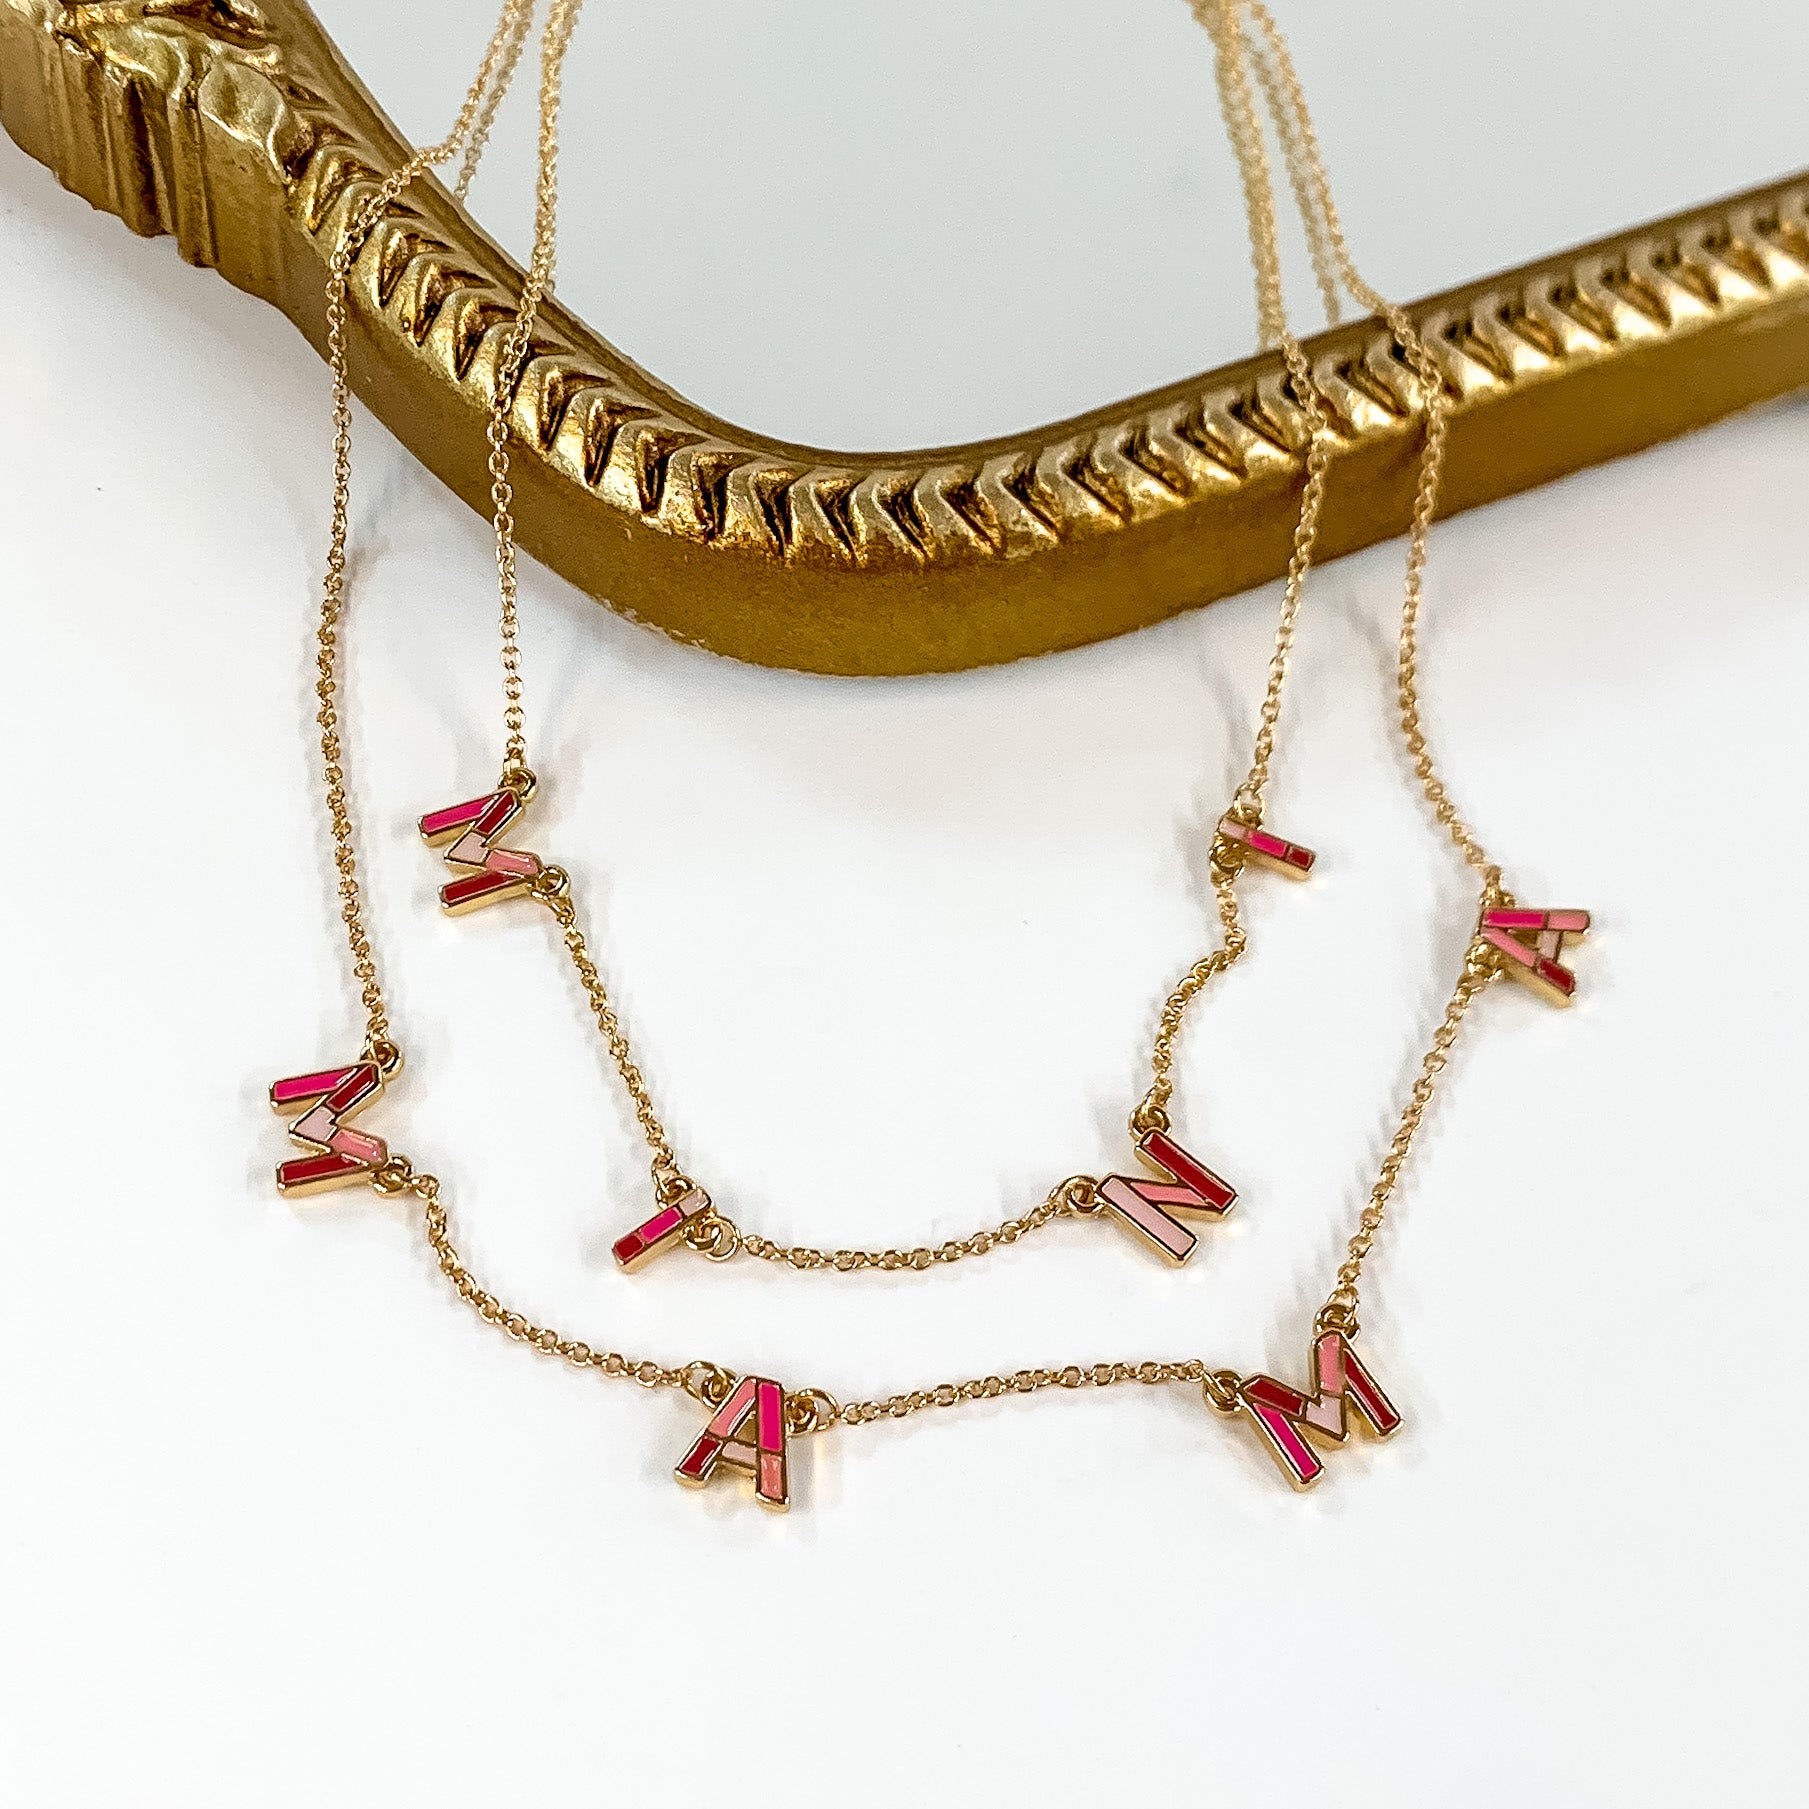 Two gold chain necklaces with pink mix letters. The longer necklace spells out "MAMA" and the shorter necklace says "MINI." These neckalces are pictured partially laying on a gold mirror on a white background. 